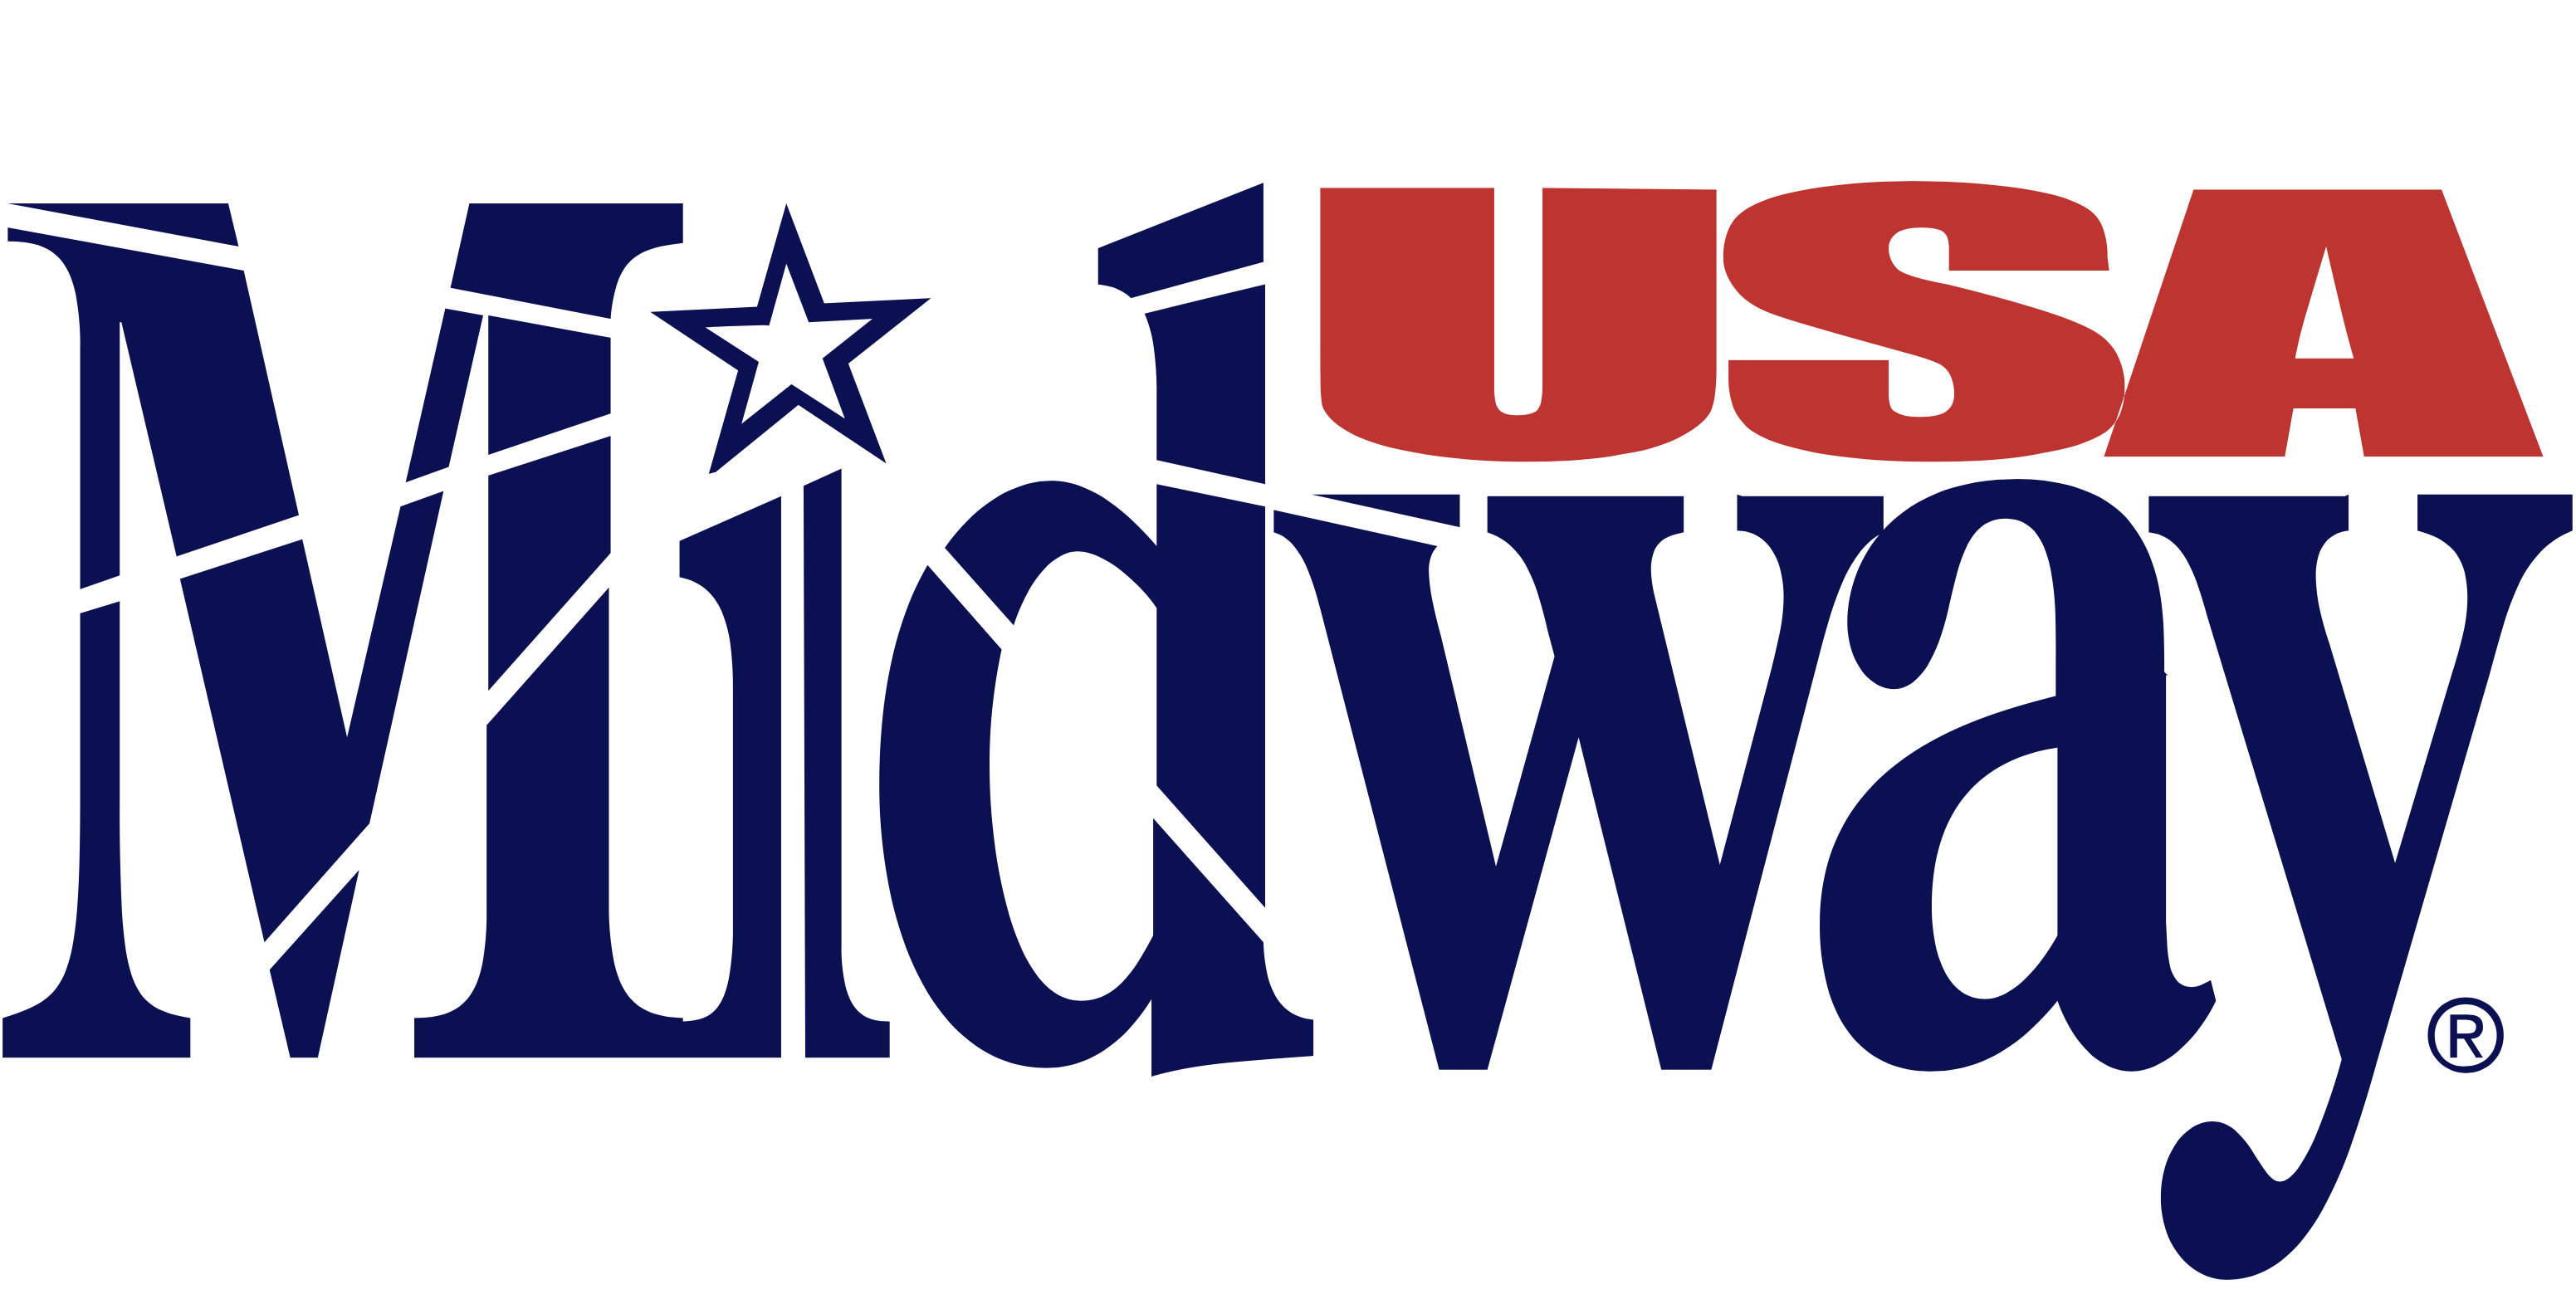 MidwayUSA Named Official Sponsor of 2021 NRA Annual Meetings & Exhibits